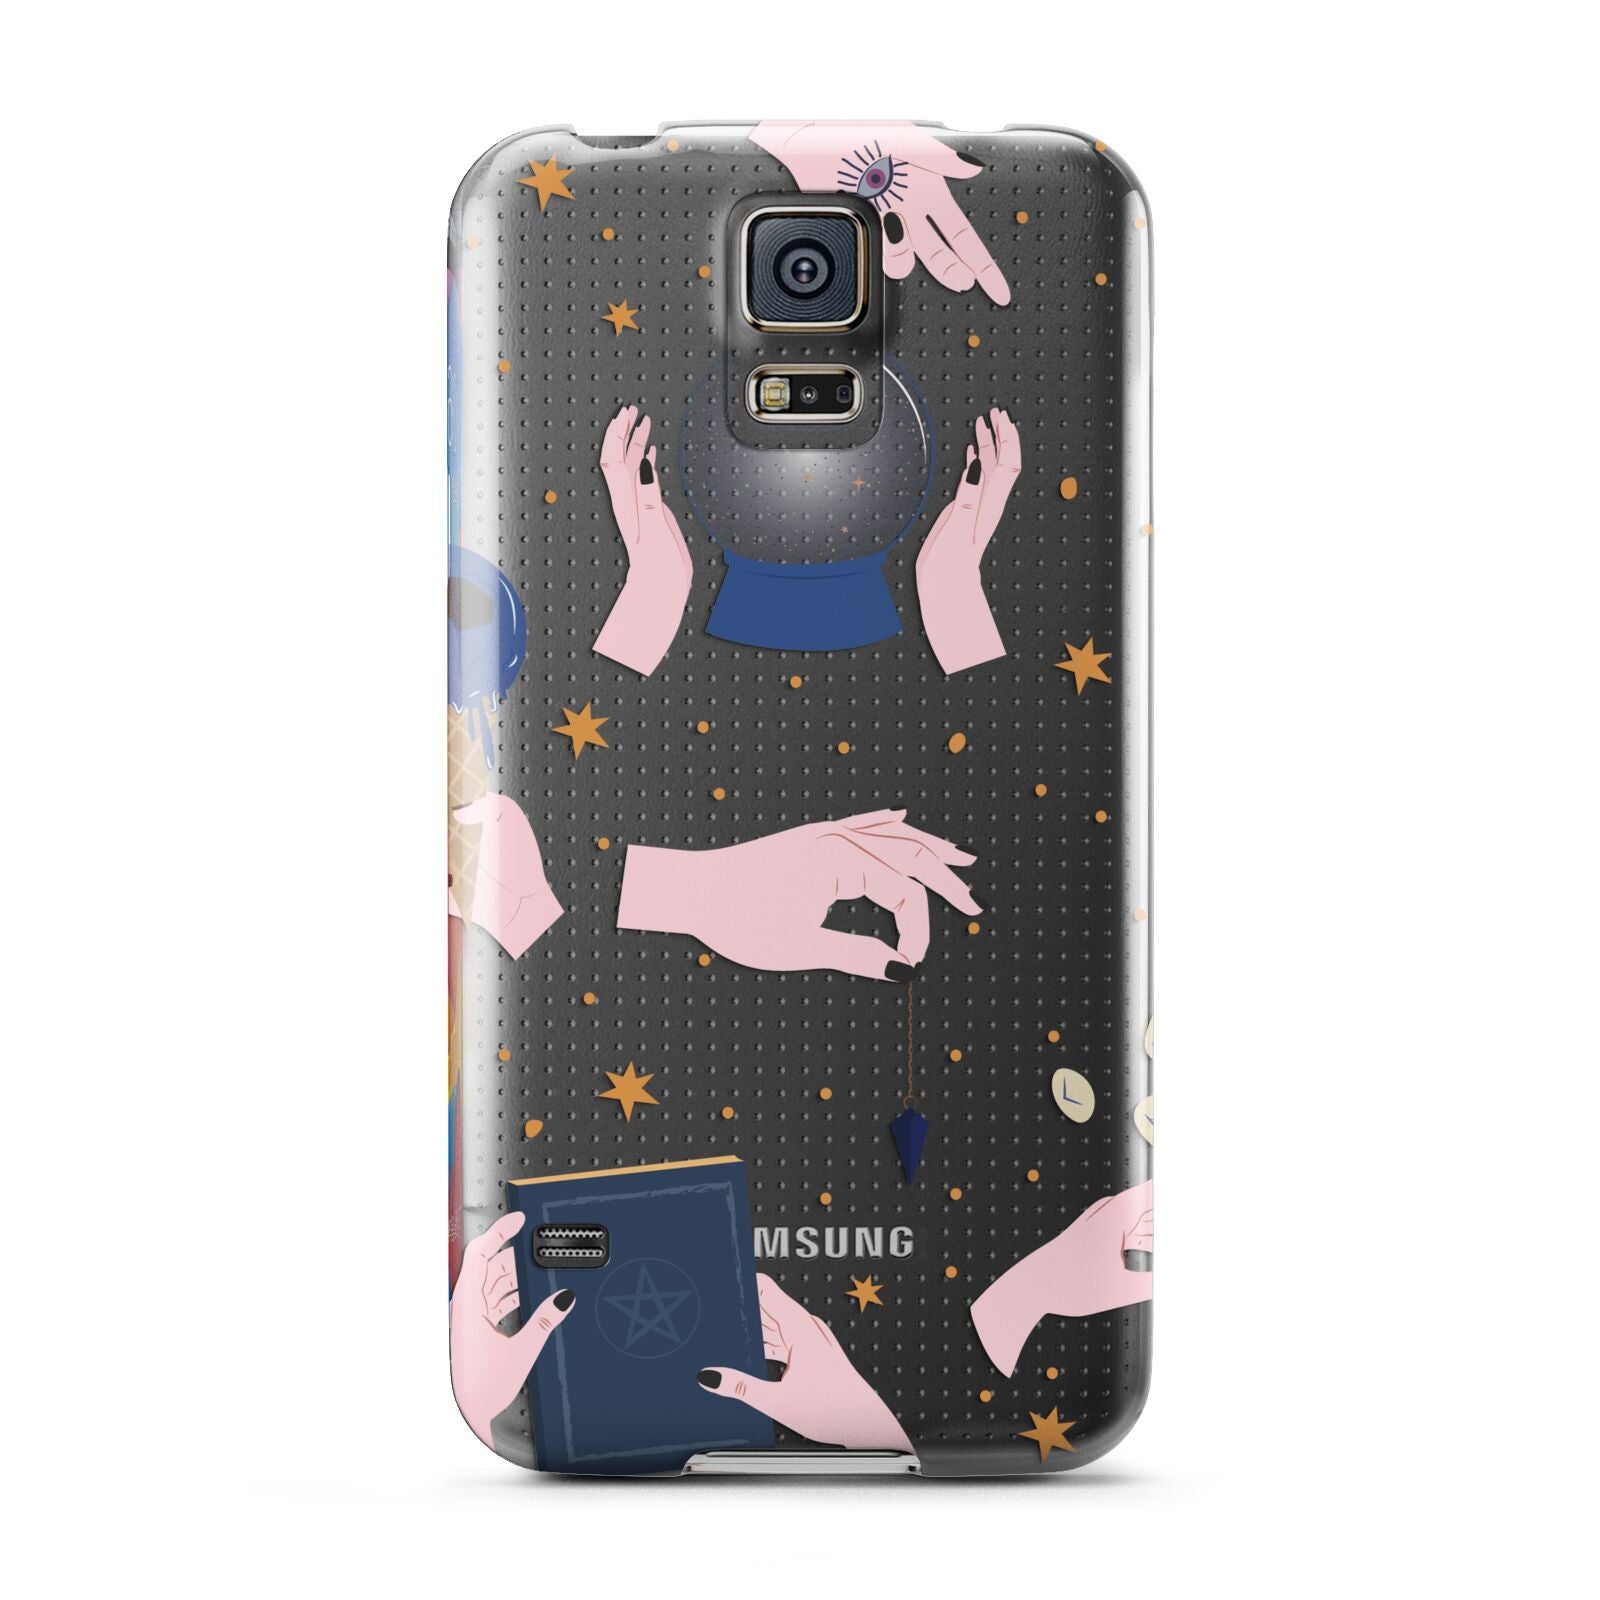 Clairvoyant Witches Hands Samsung Galaxy S5 Case